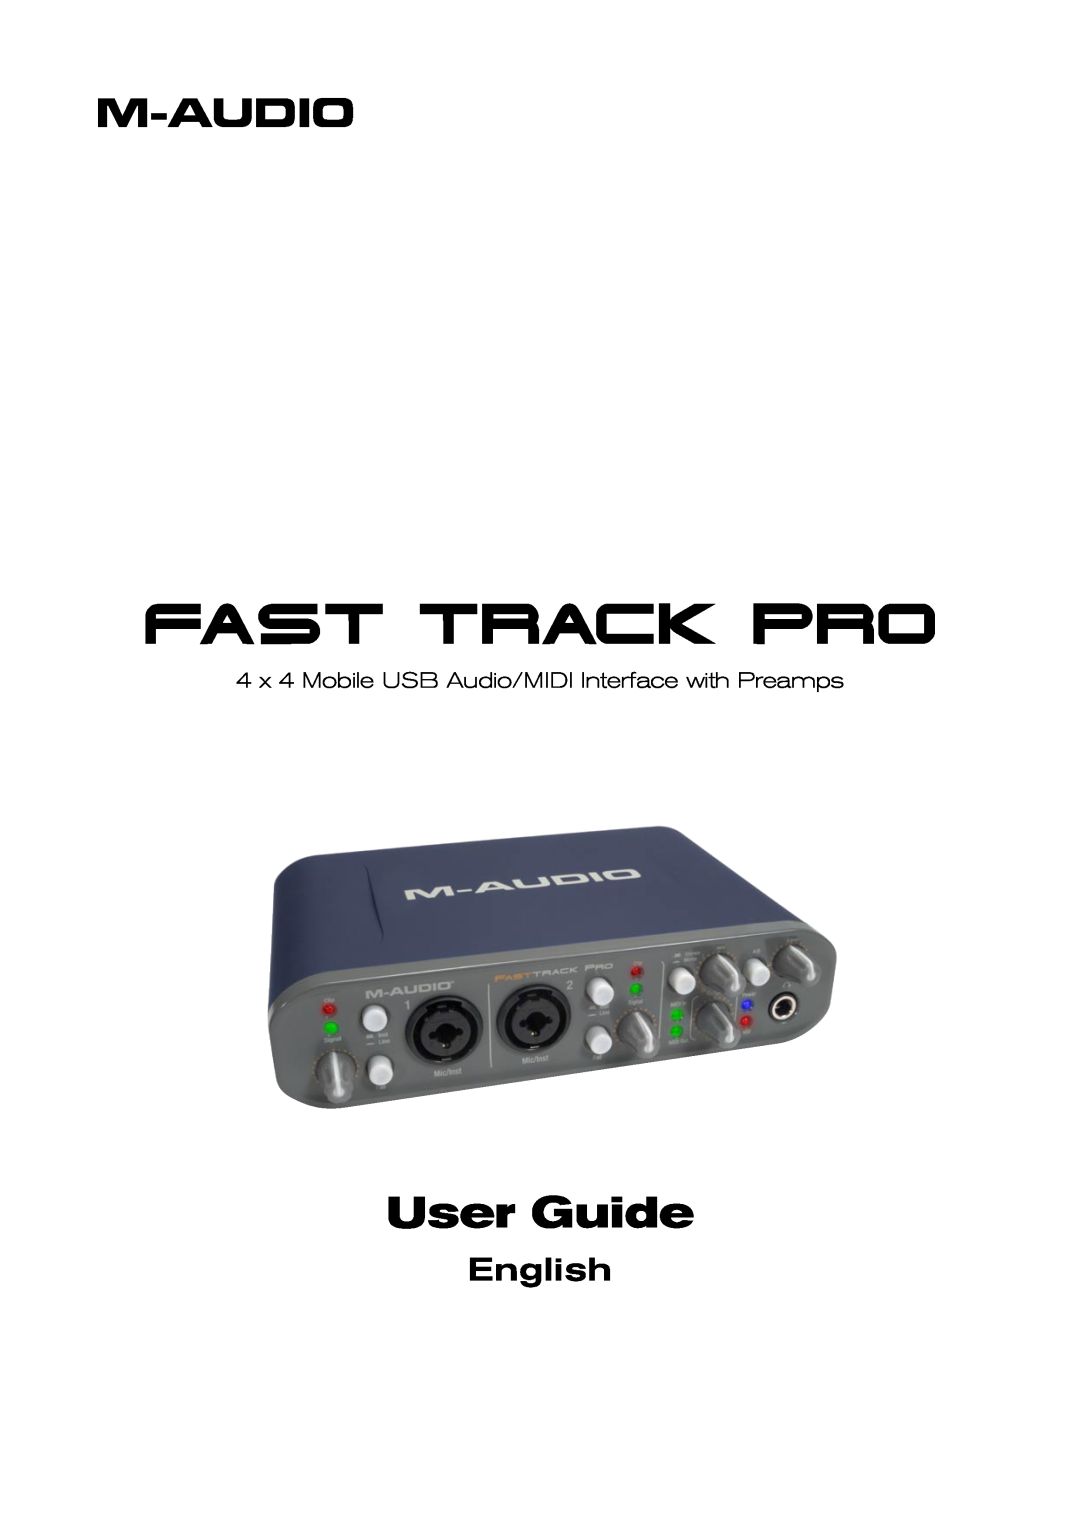 M-Audio Fast Track Pro 4 x 4 Mobile USB Audio/MIDI Interface with Preamps manual User Guide, English 